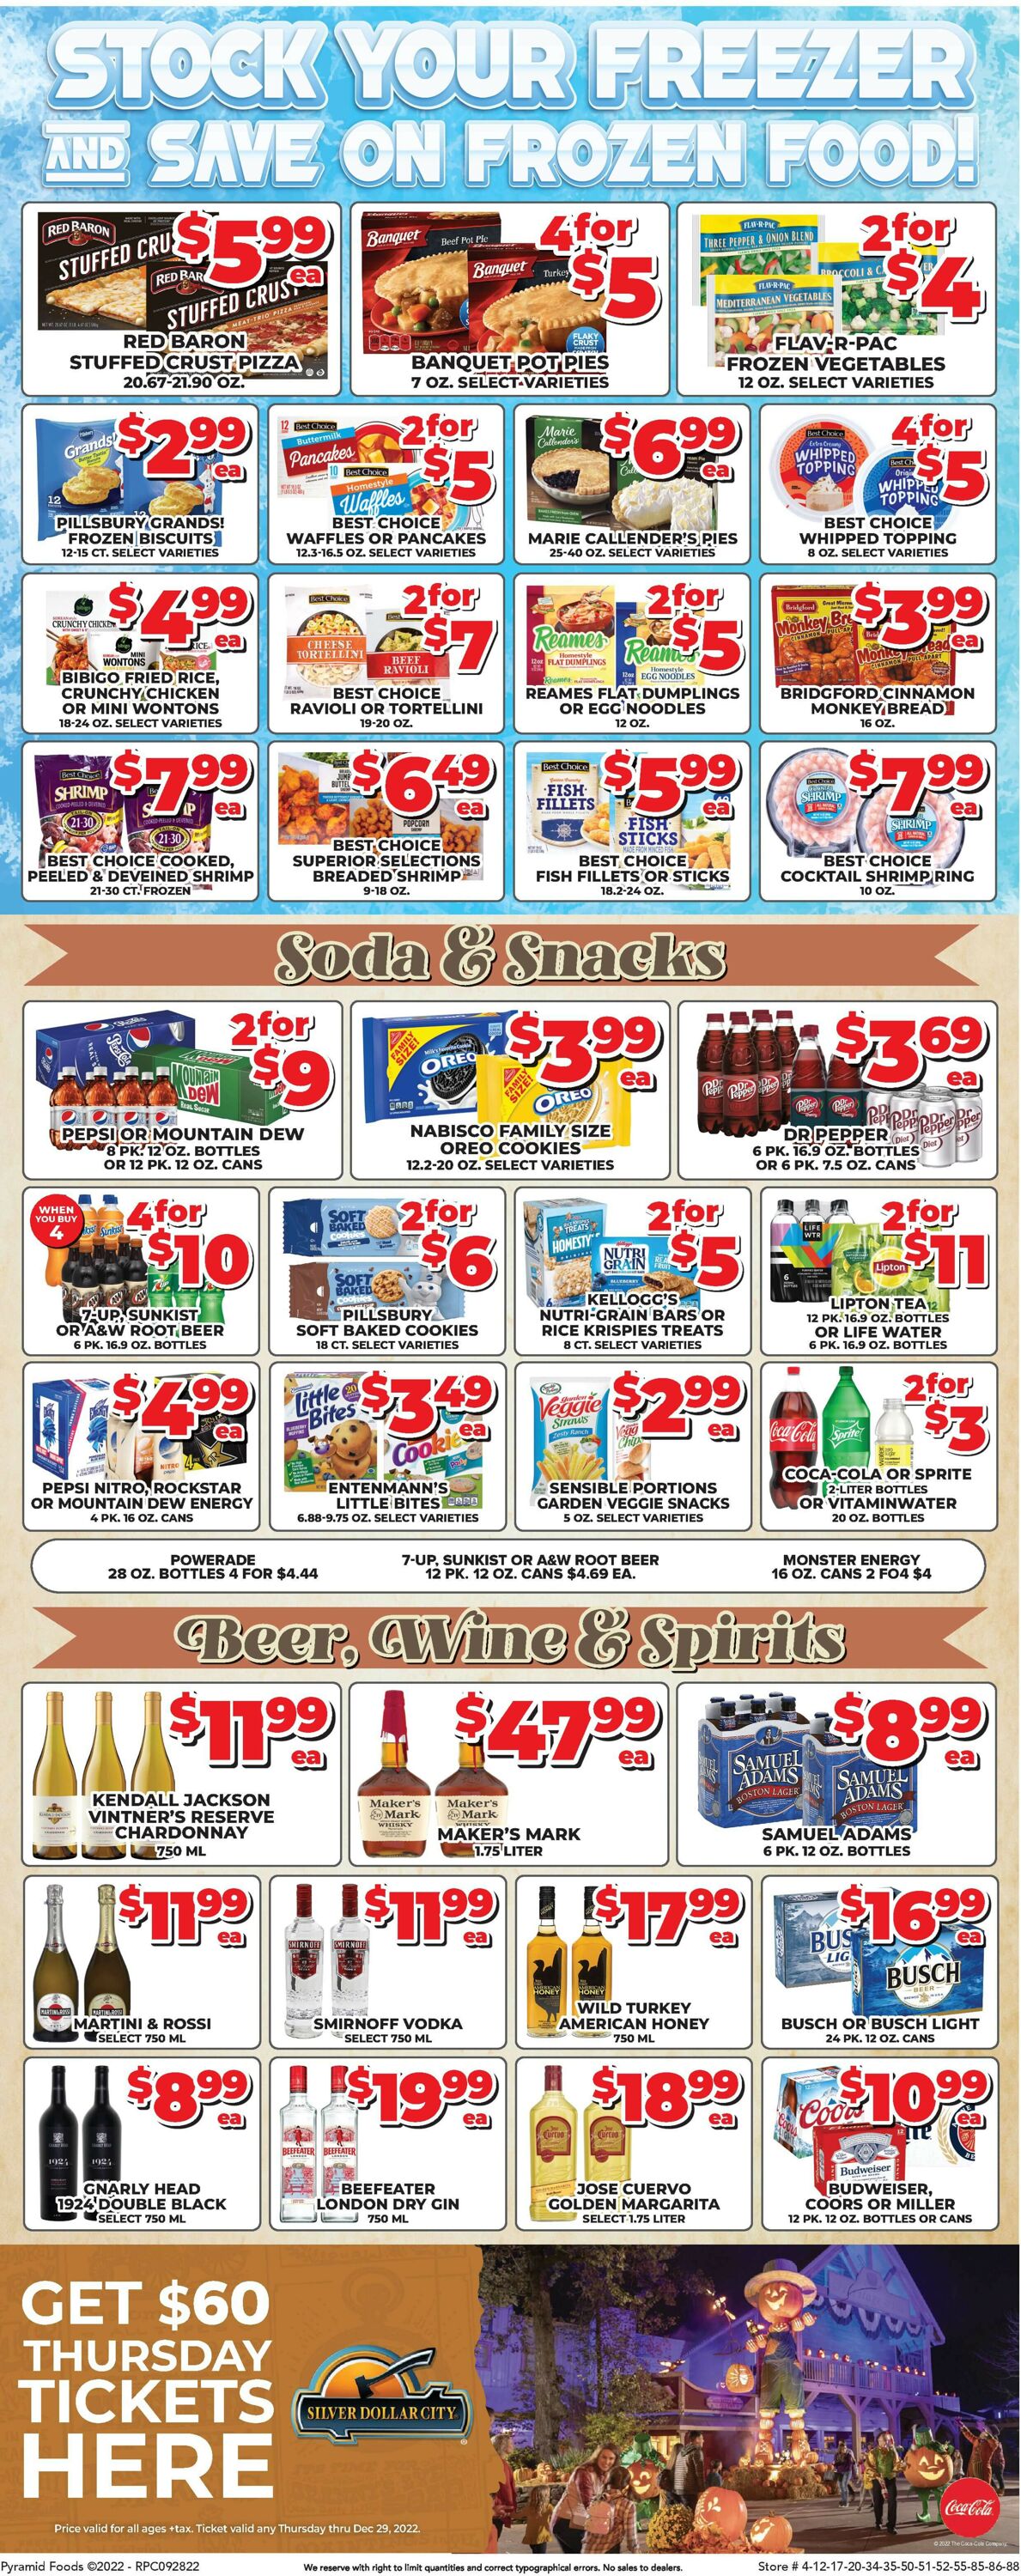 Price Cutter Weekly Ad Circular - valid 09/28-10/04/2022 (Page 4)